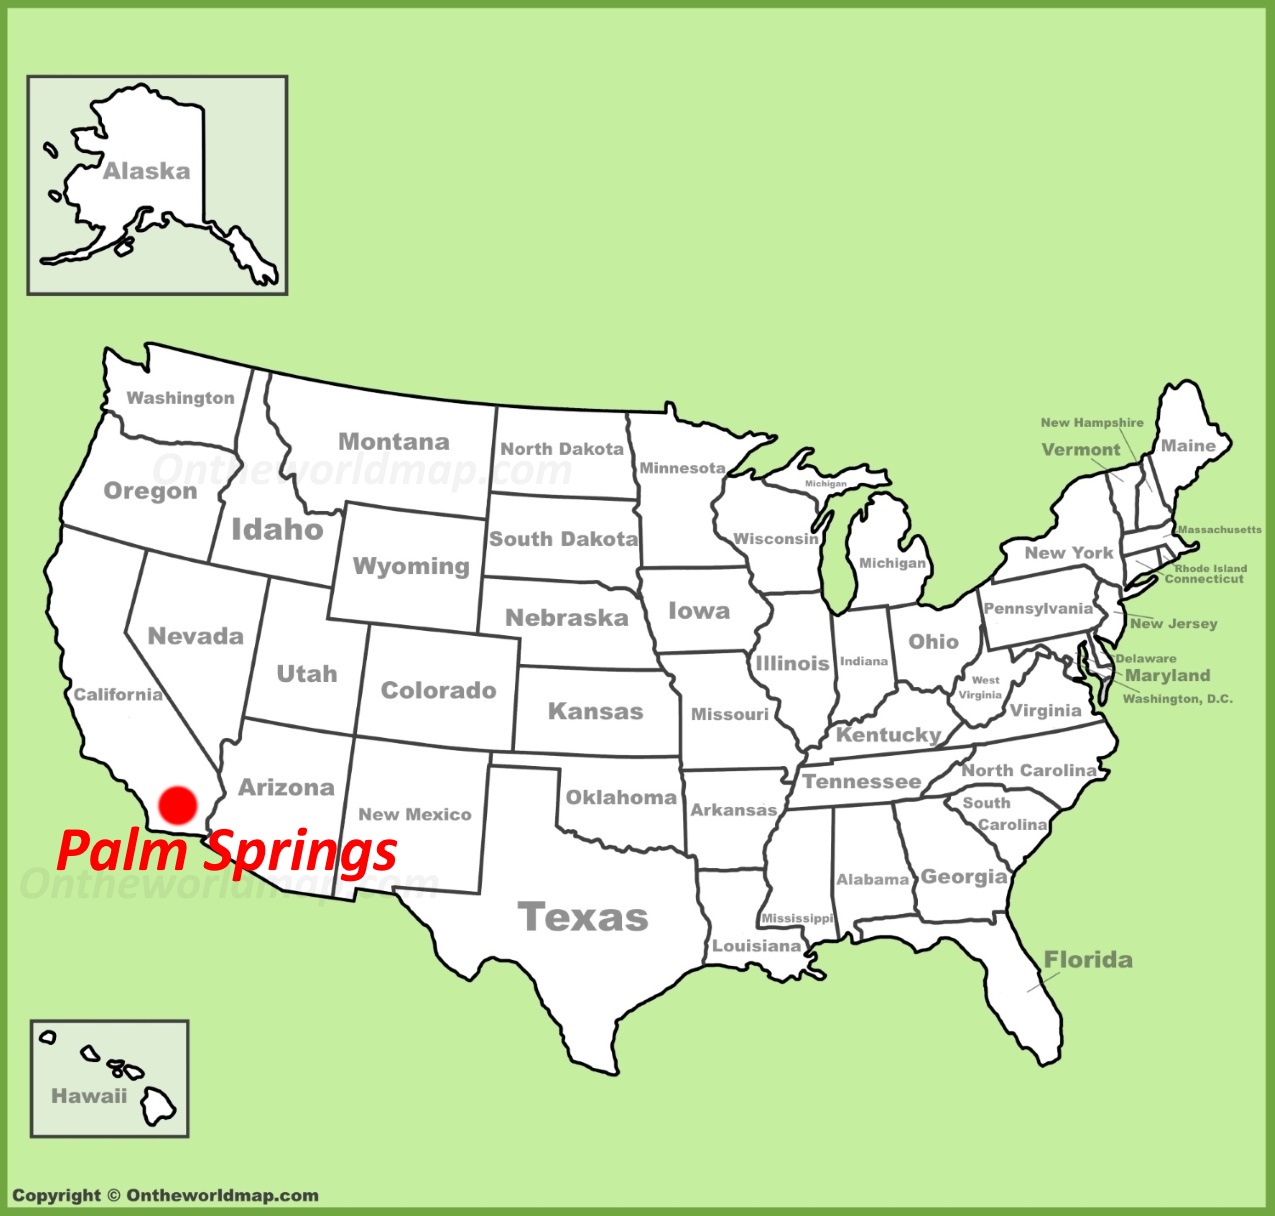 Palm Springs Location On The Us Map 